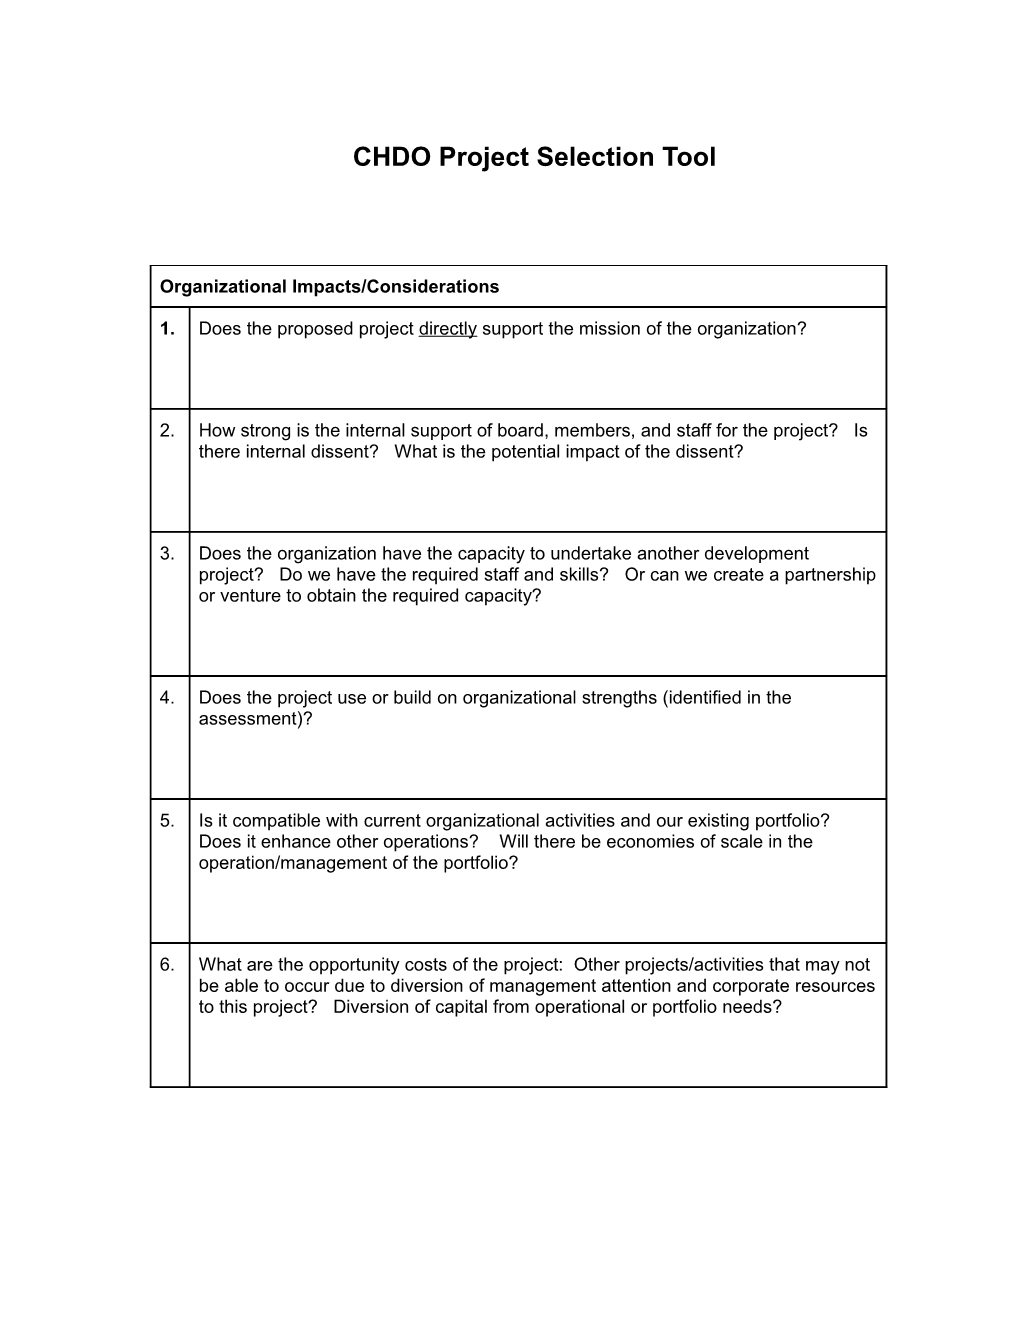 CHDO Project Selection Tool